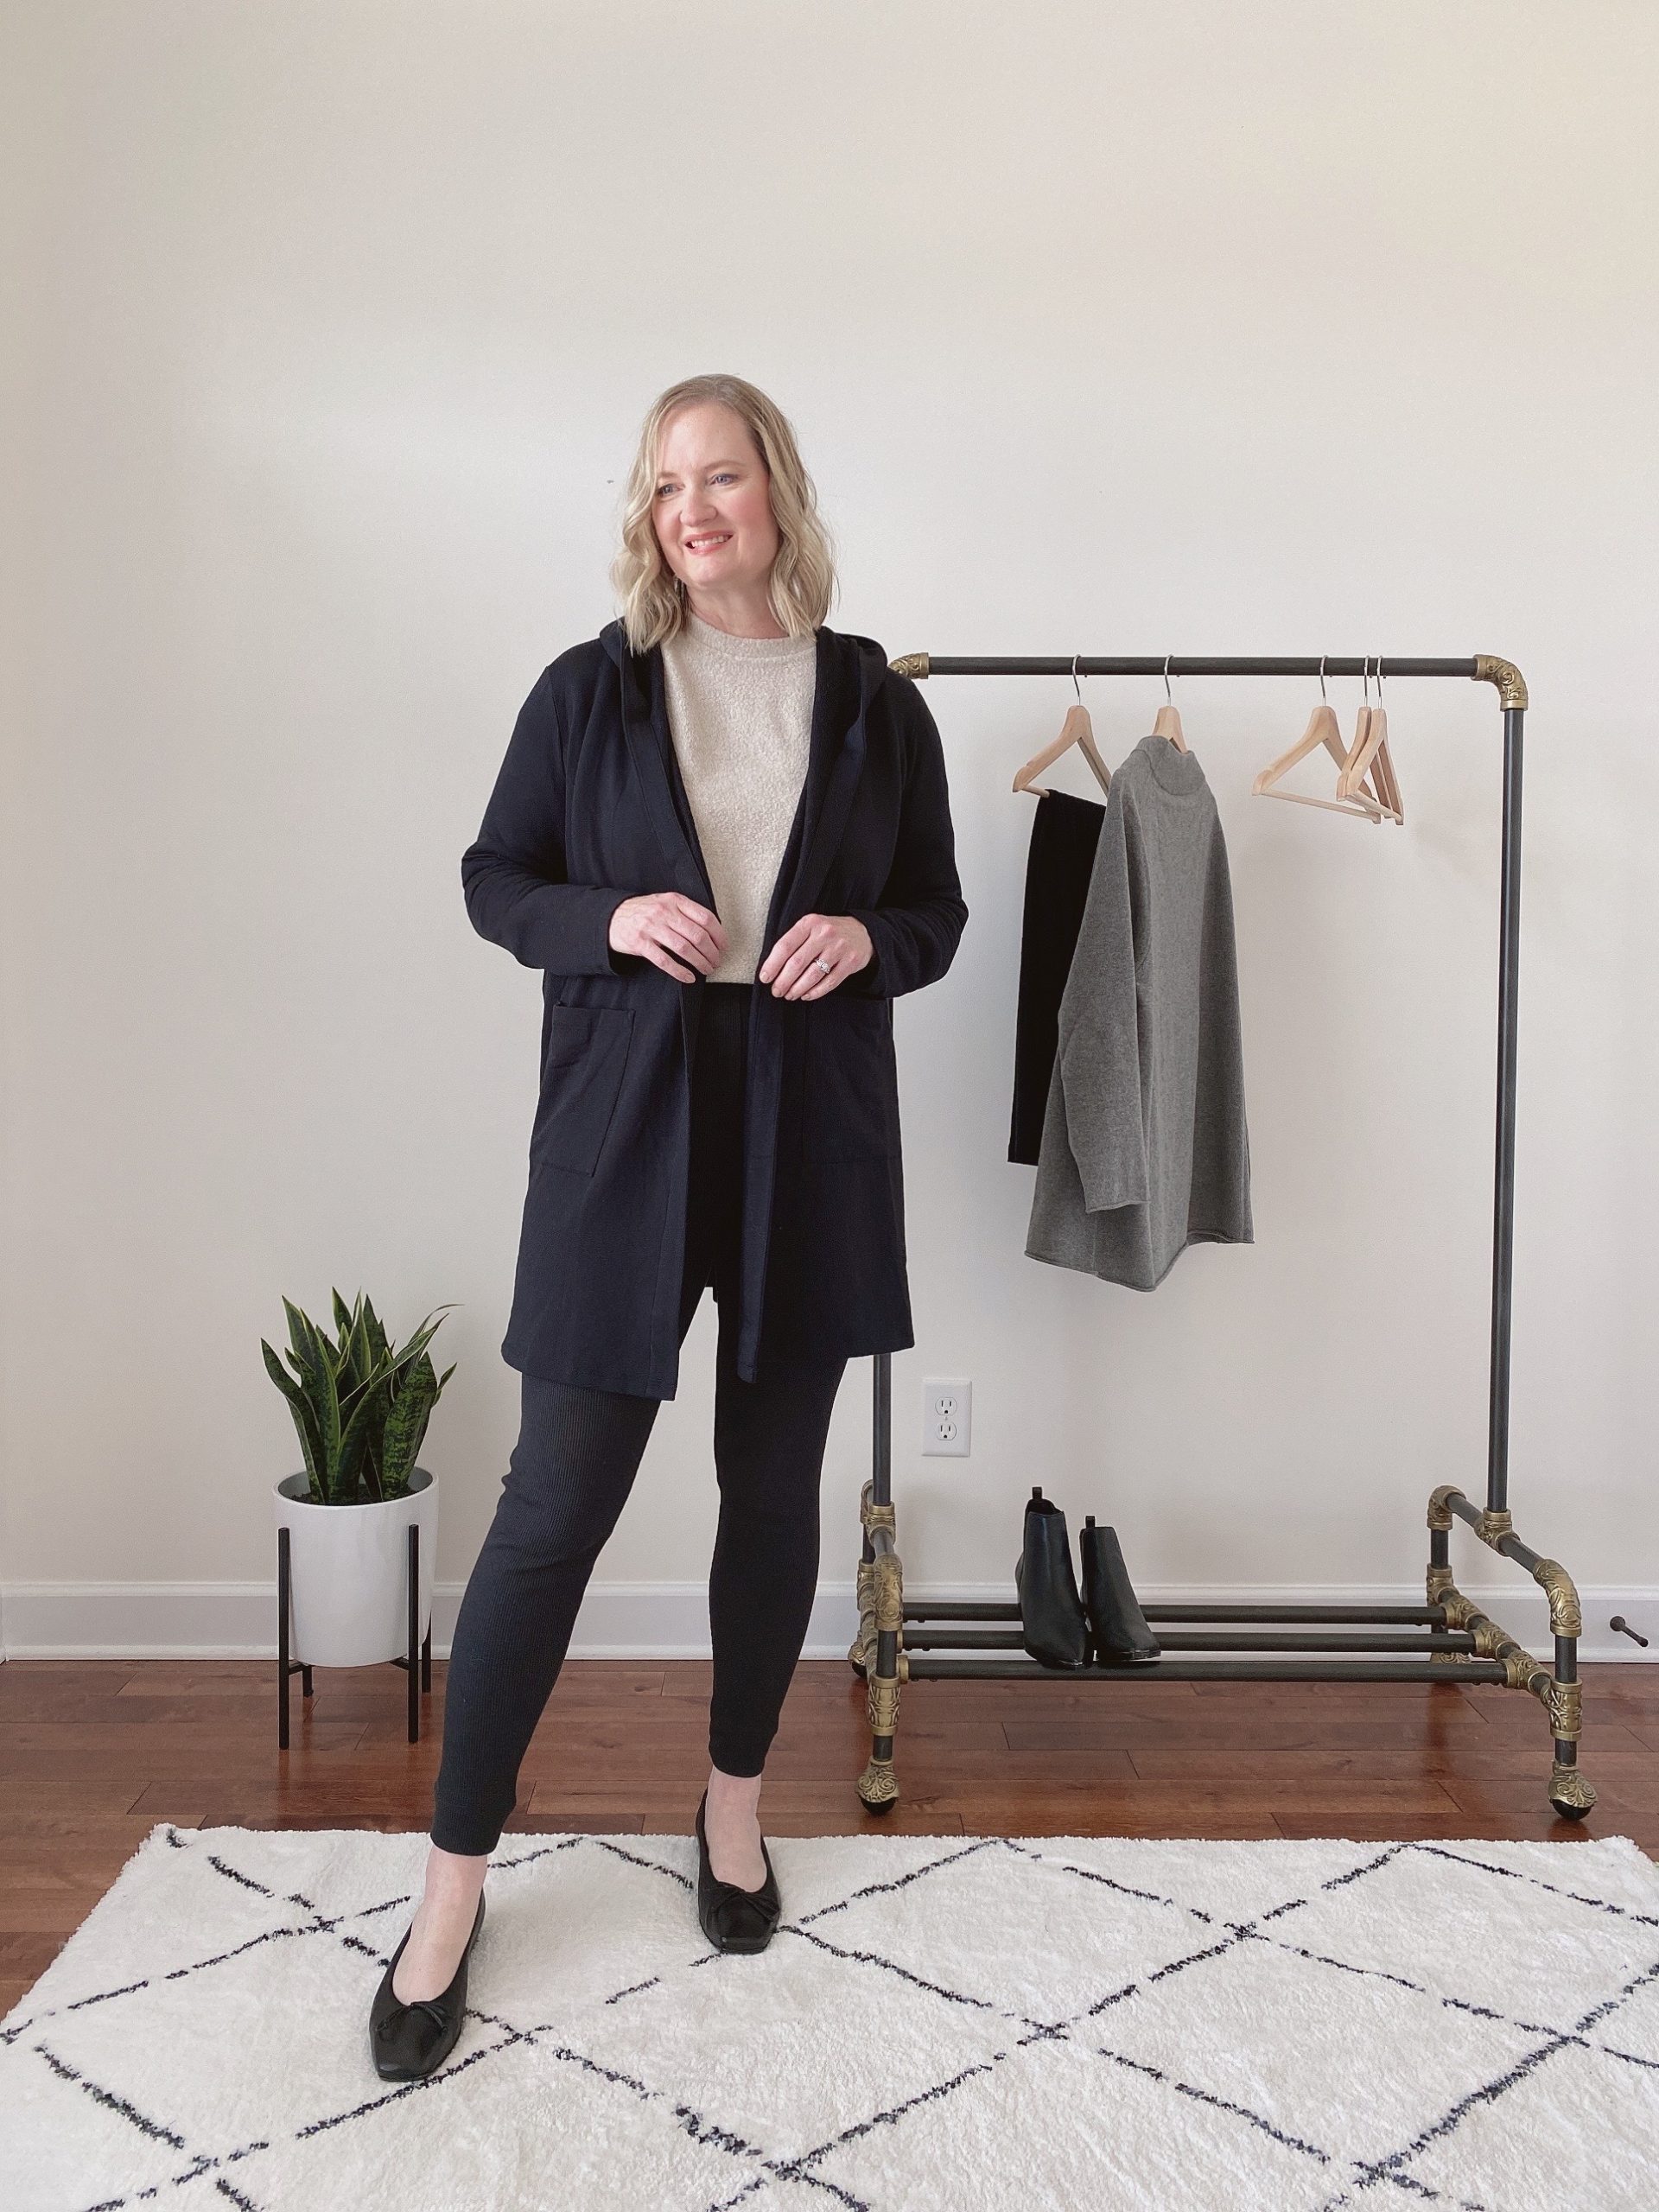 Eileen Fisher Created an Exclusive Capsule Collection for